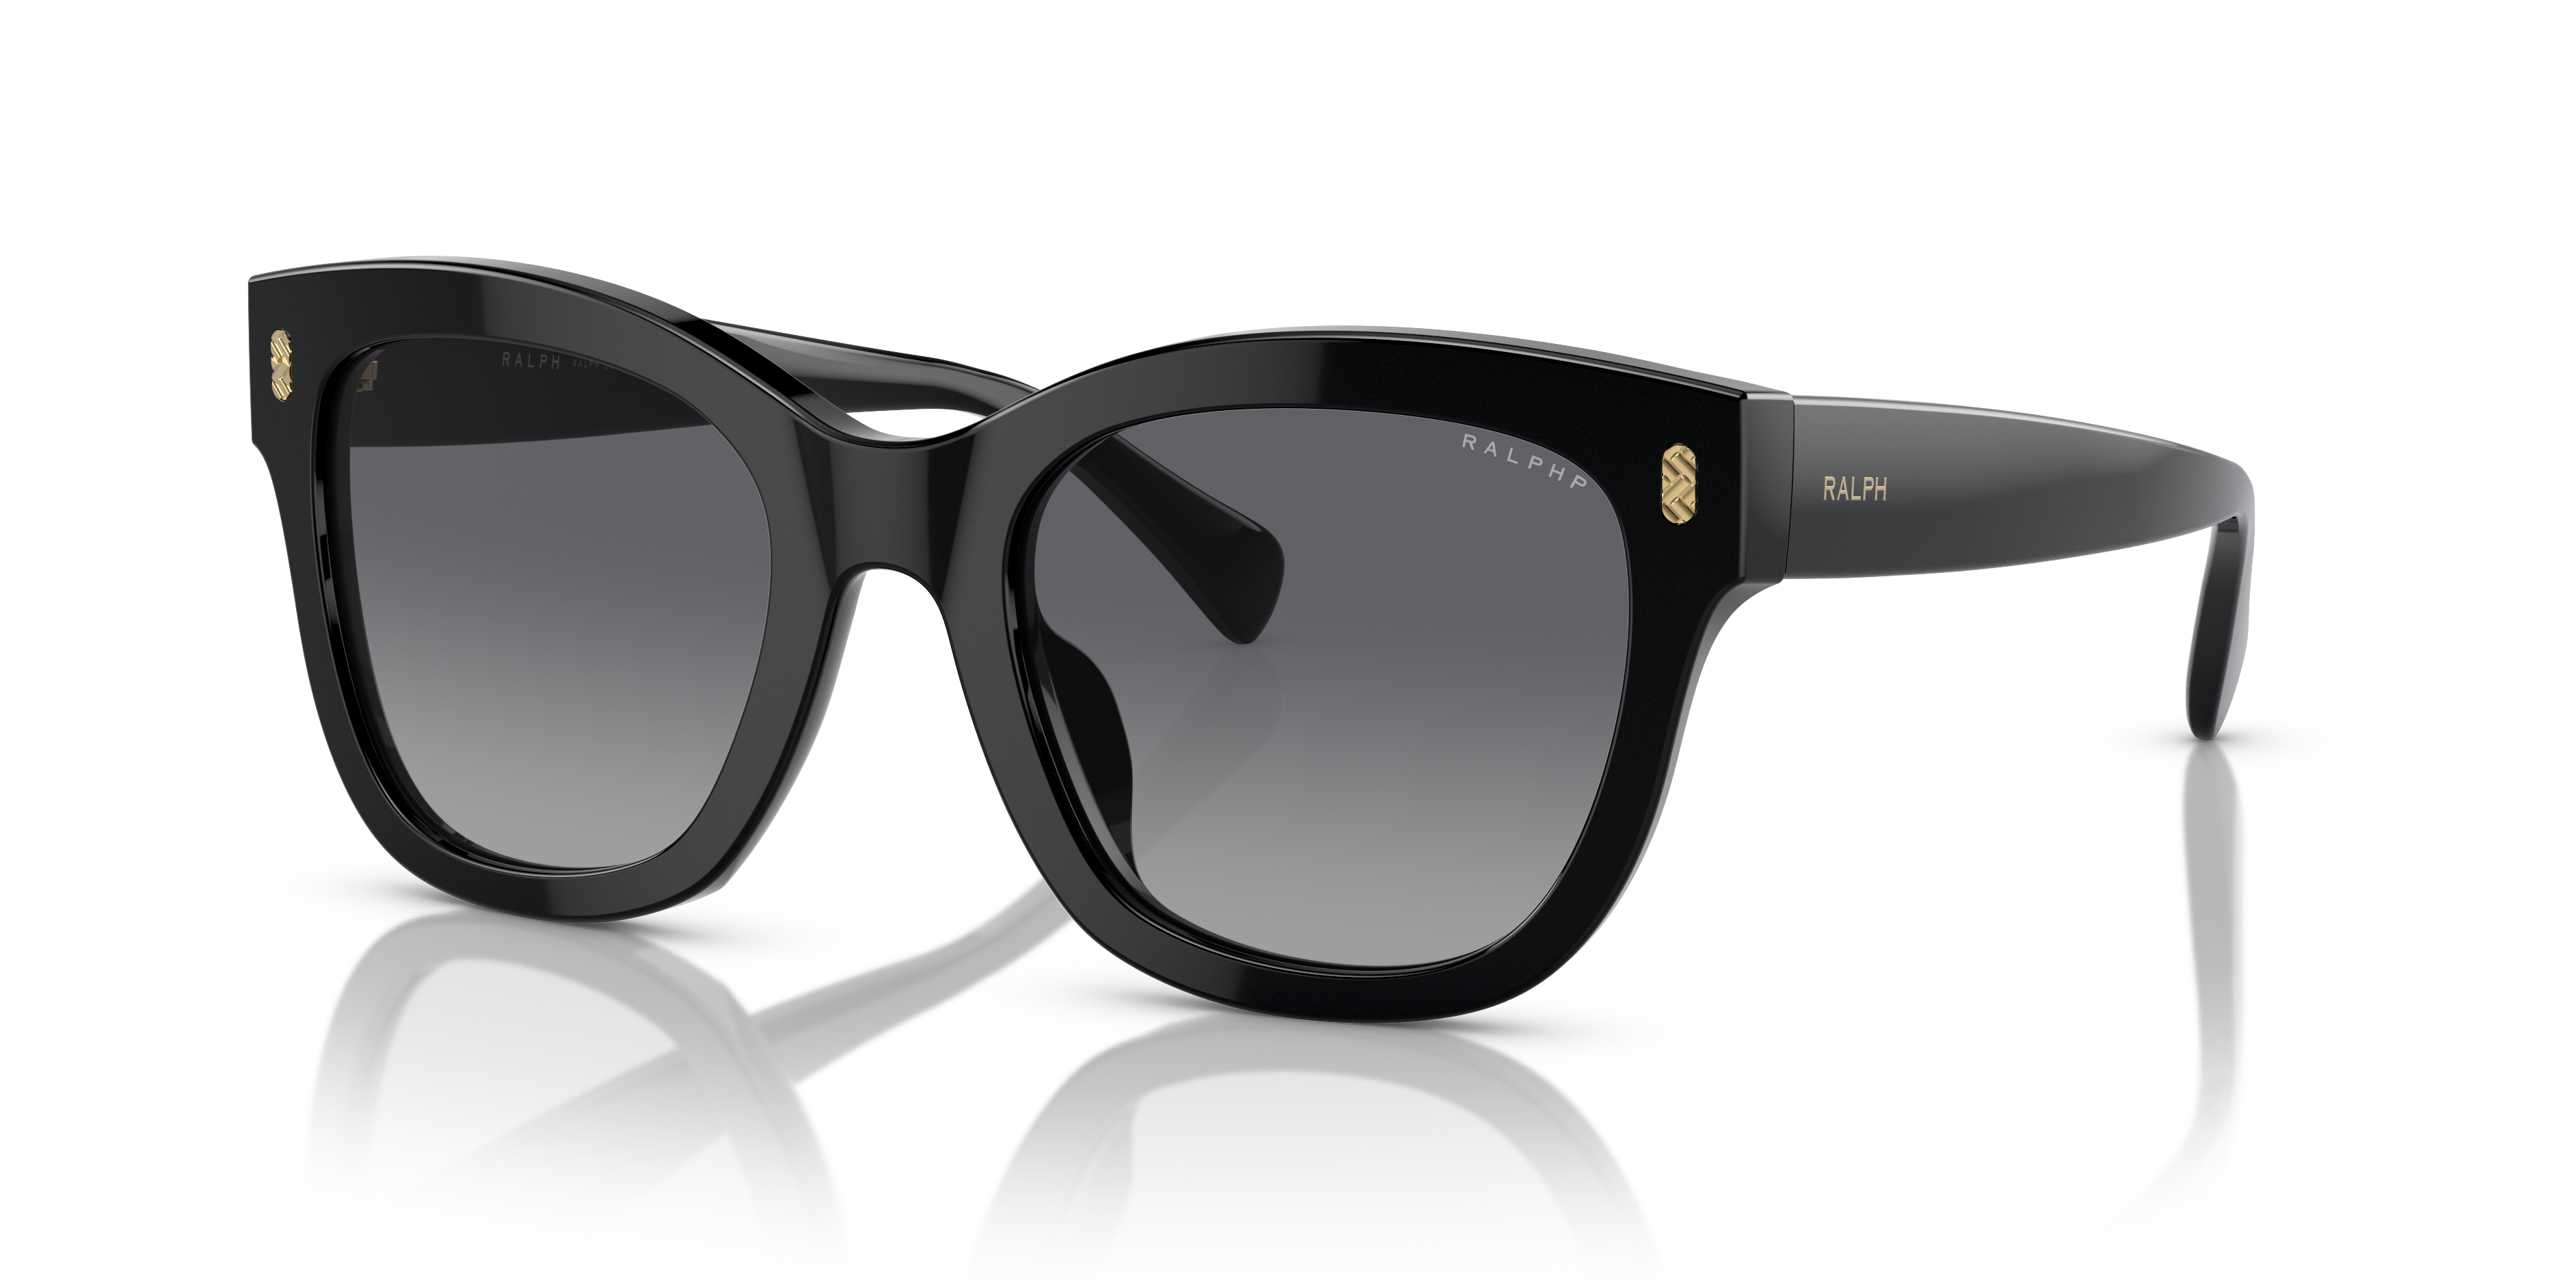 Buy John Jacobs Sunglasses at Best Price at Myntra